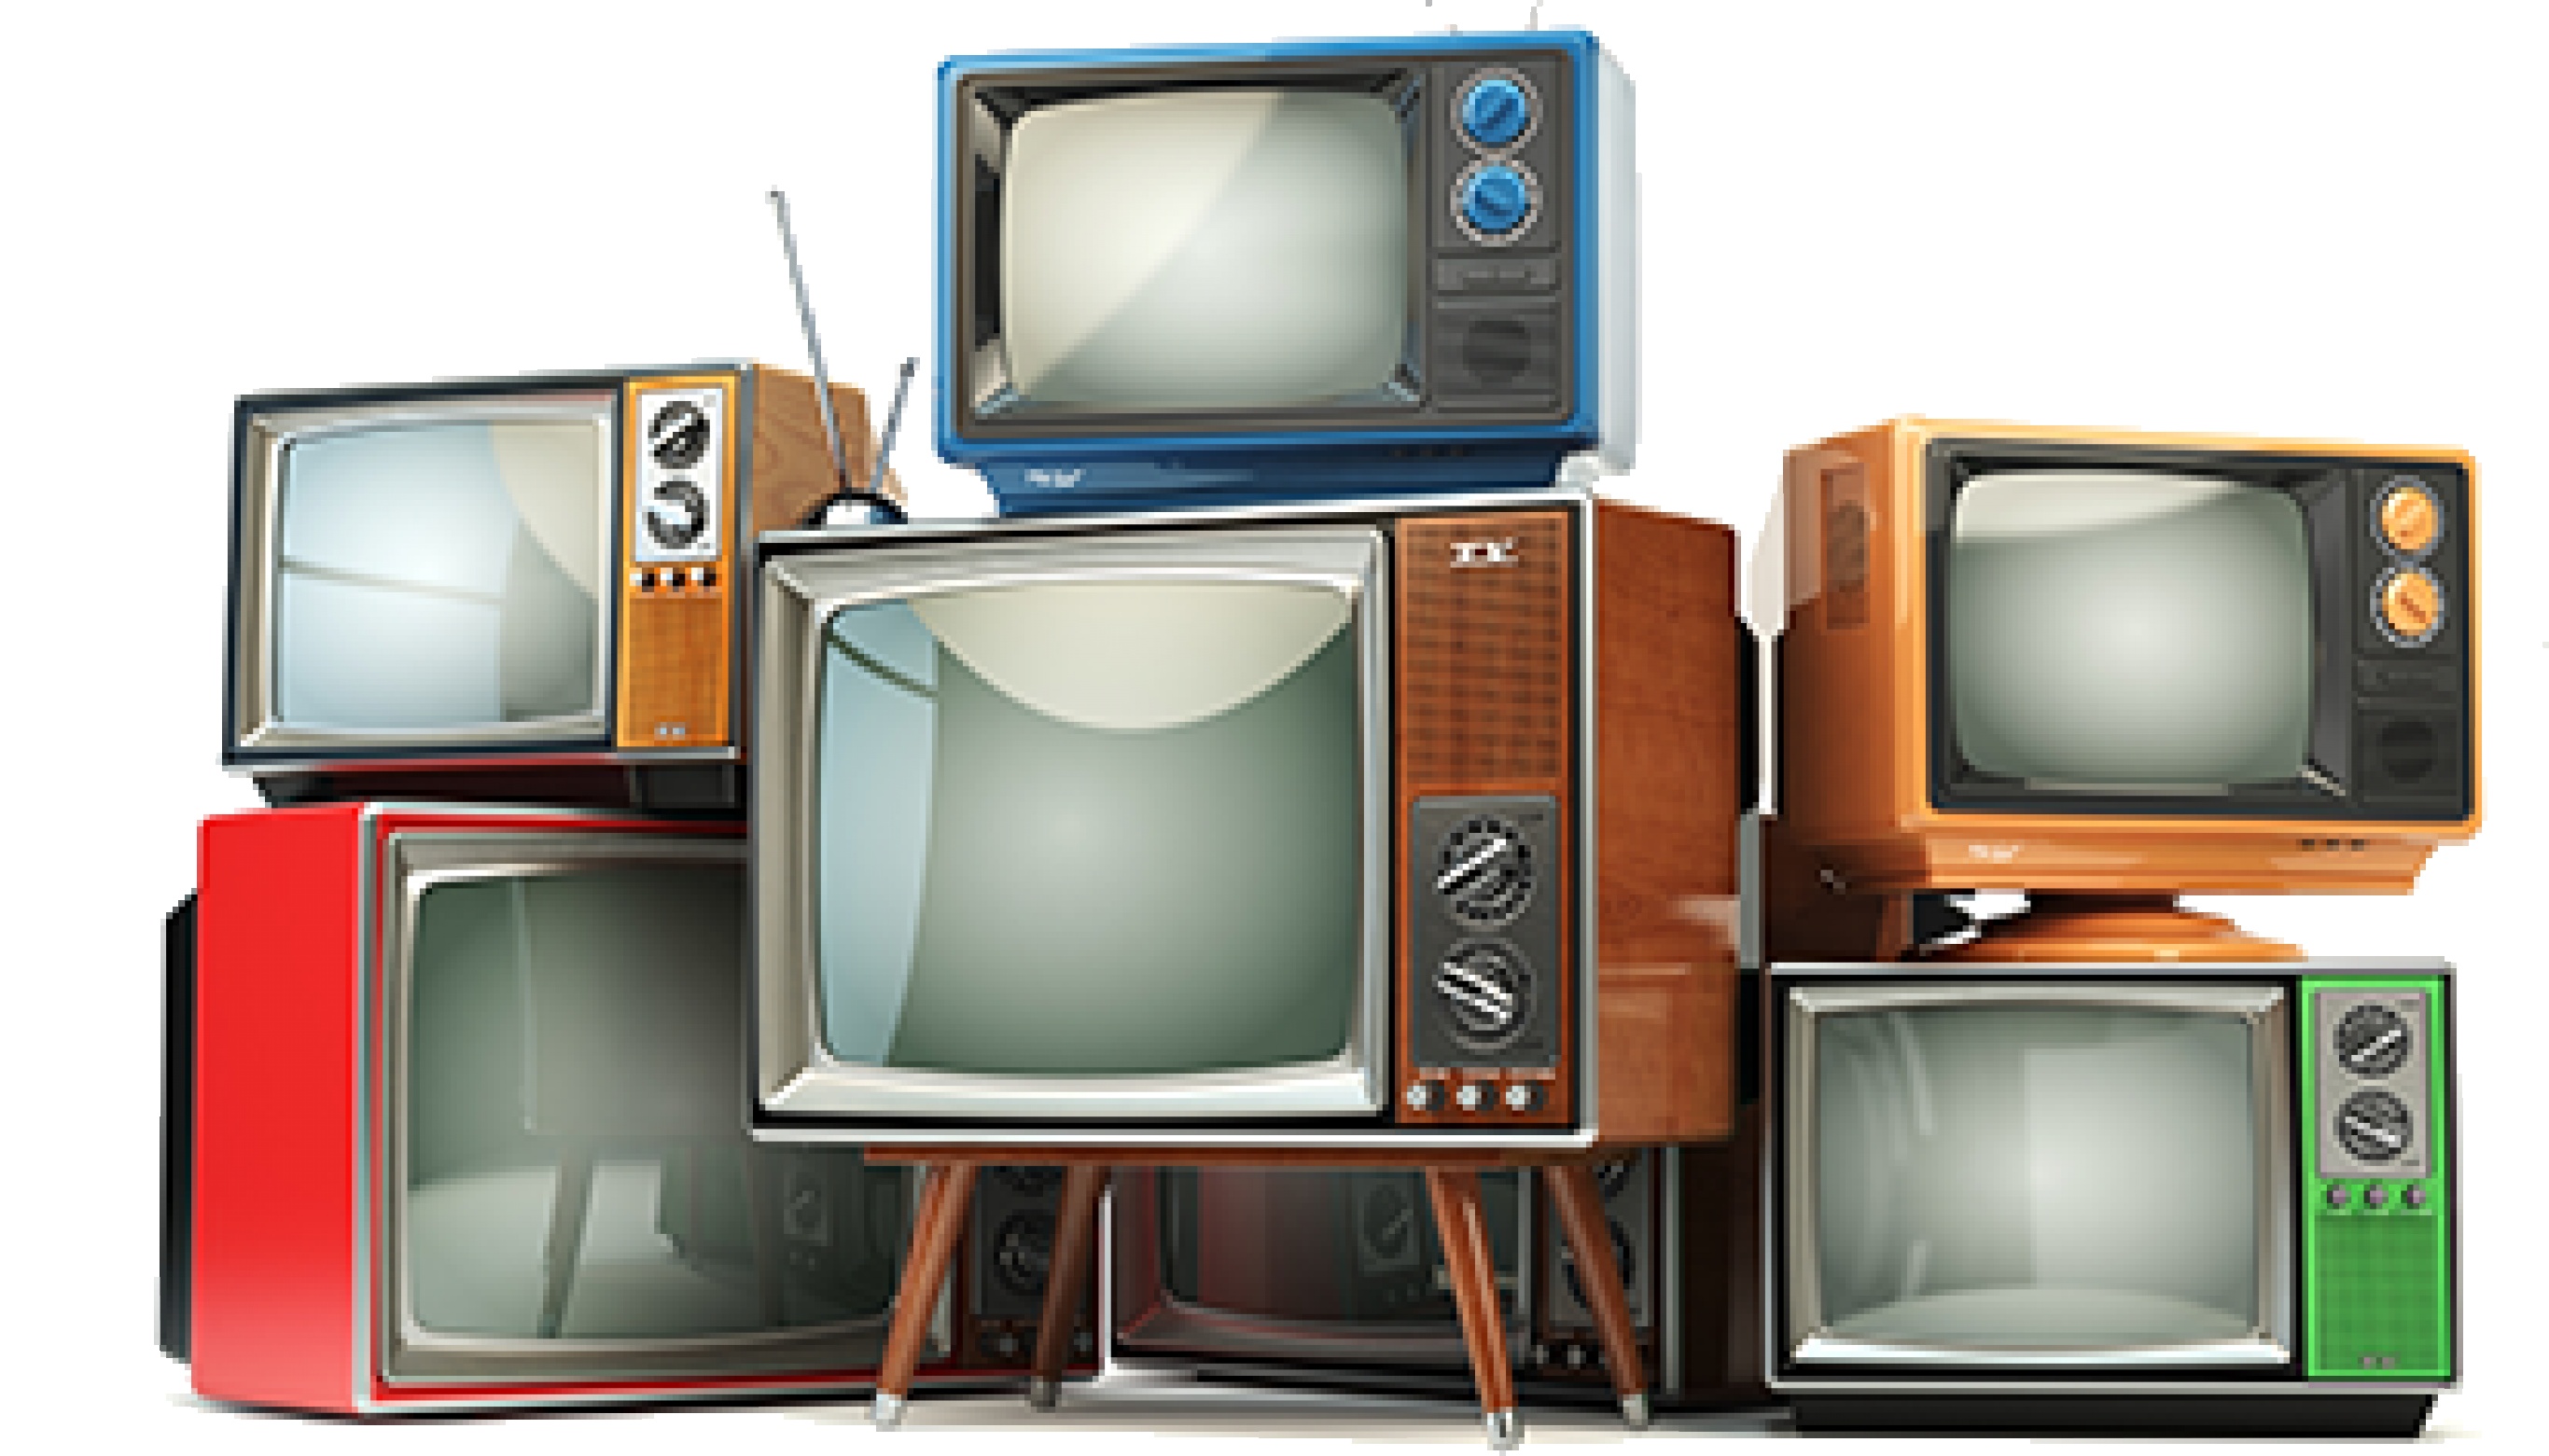 TV Broadcasting – Is The Future Bright or Bleak? | Frame 25